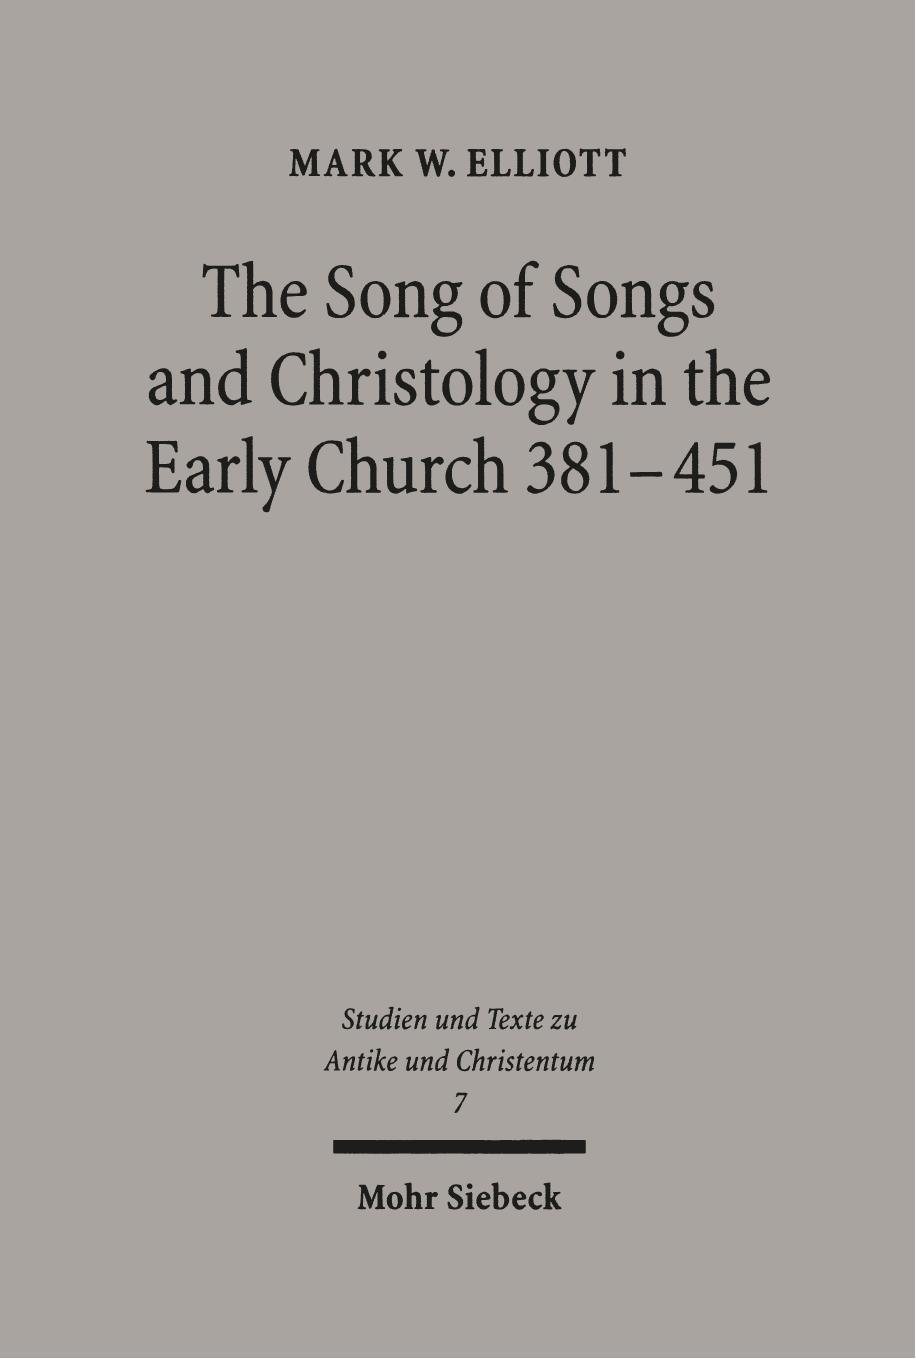 The Song of Songs and Christology in the Early Church 381â451 by Mark W. Elliott